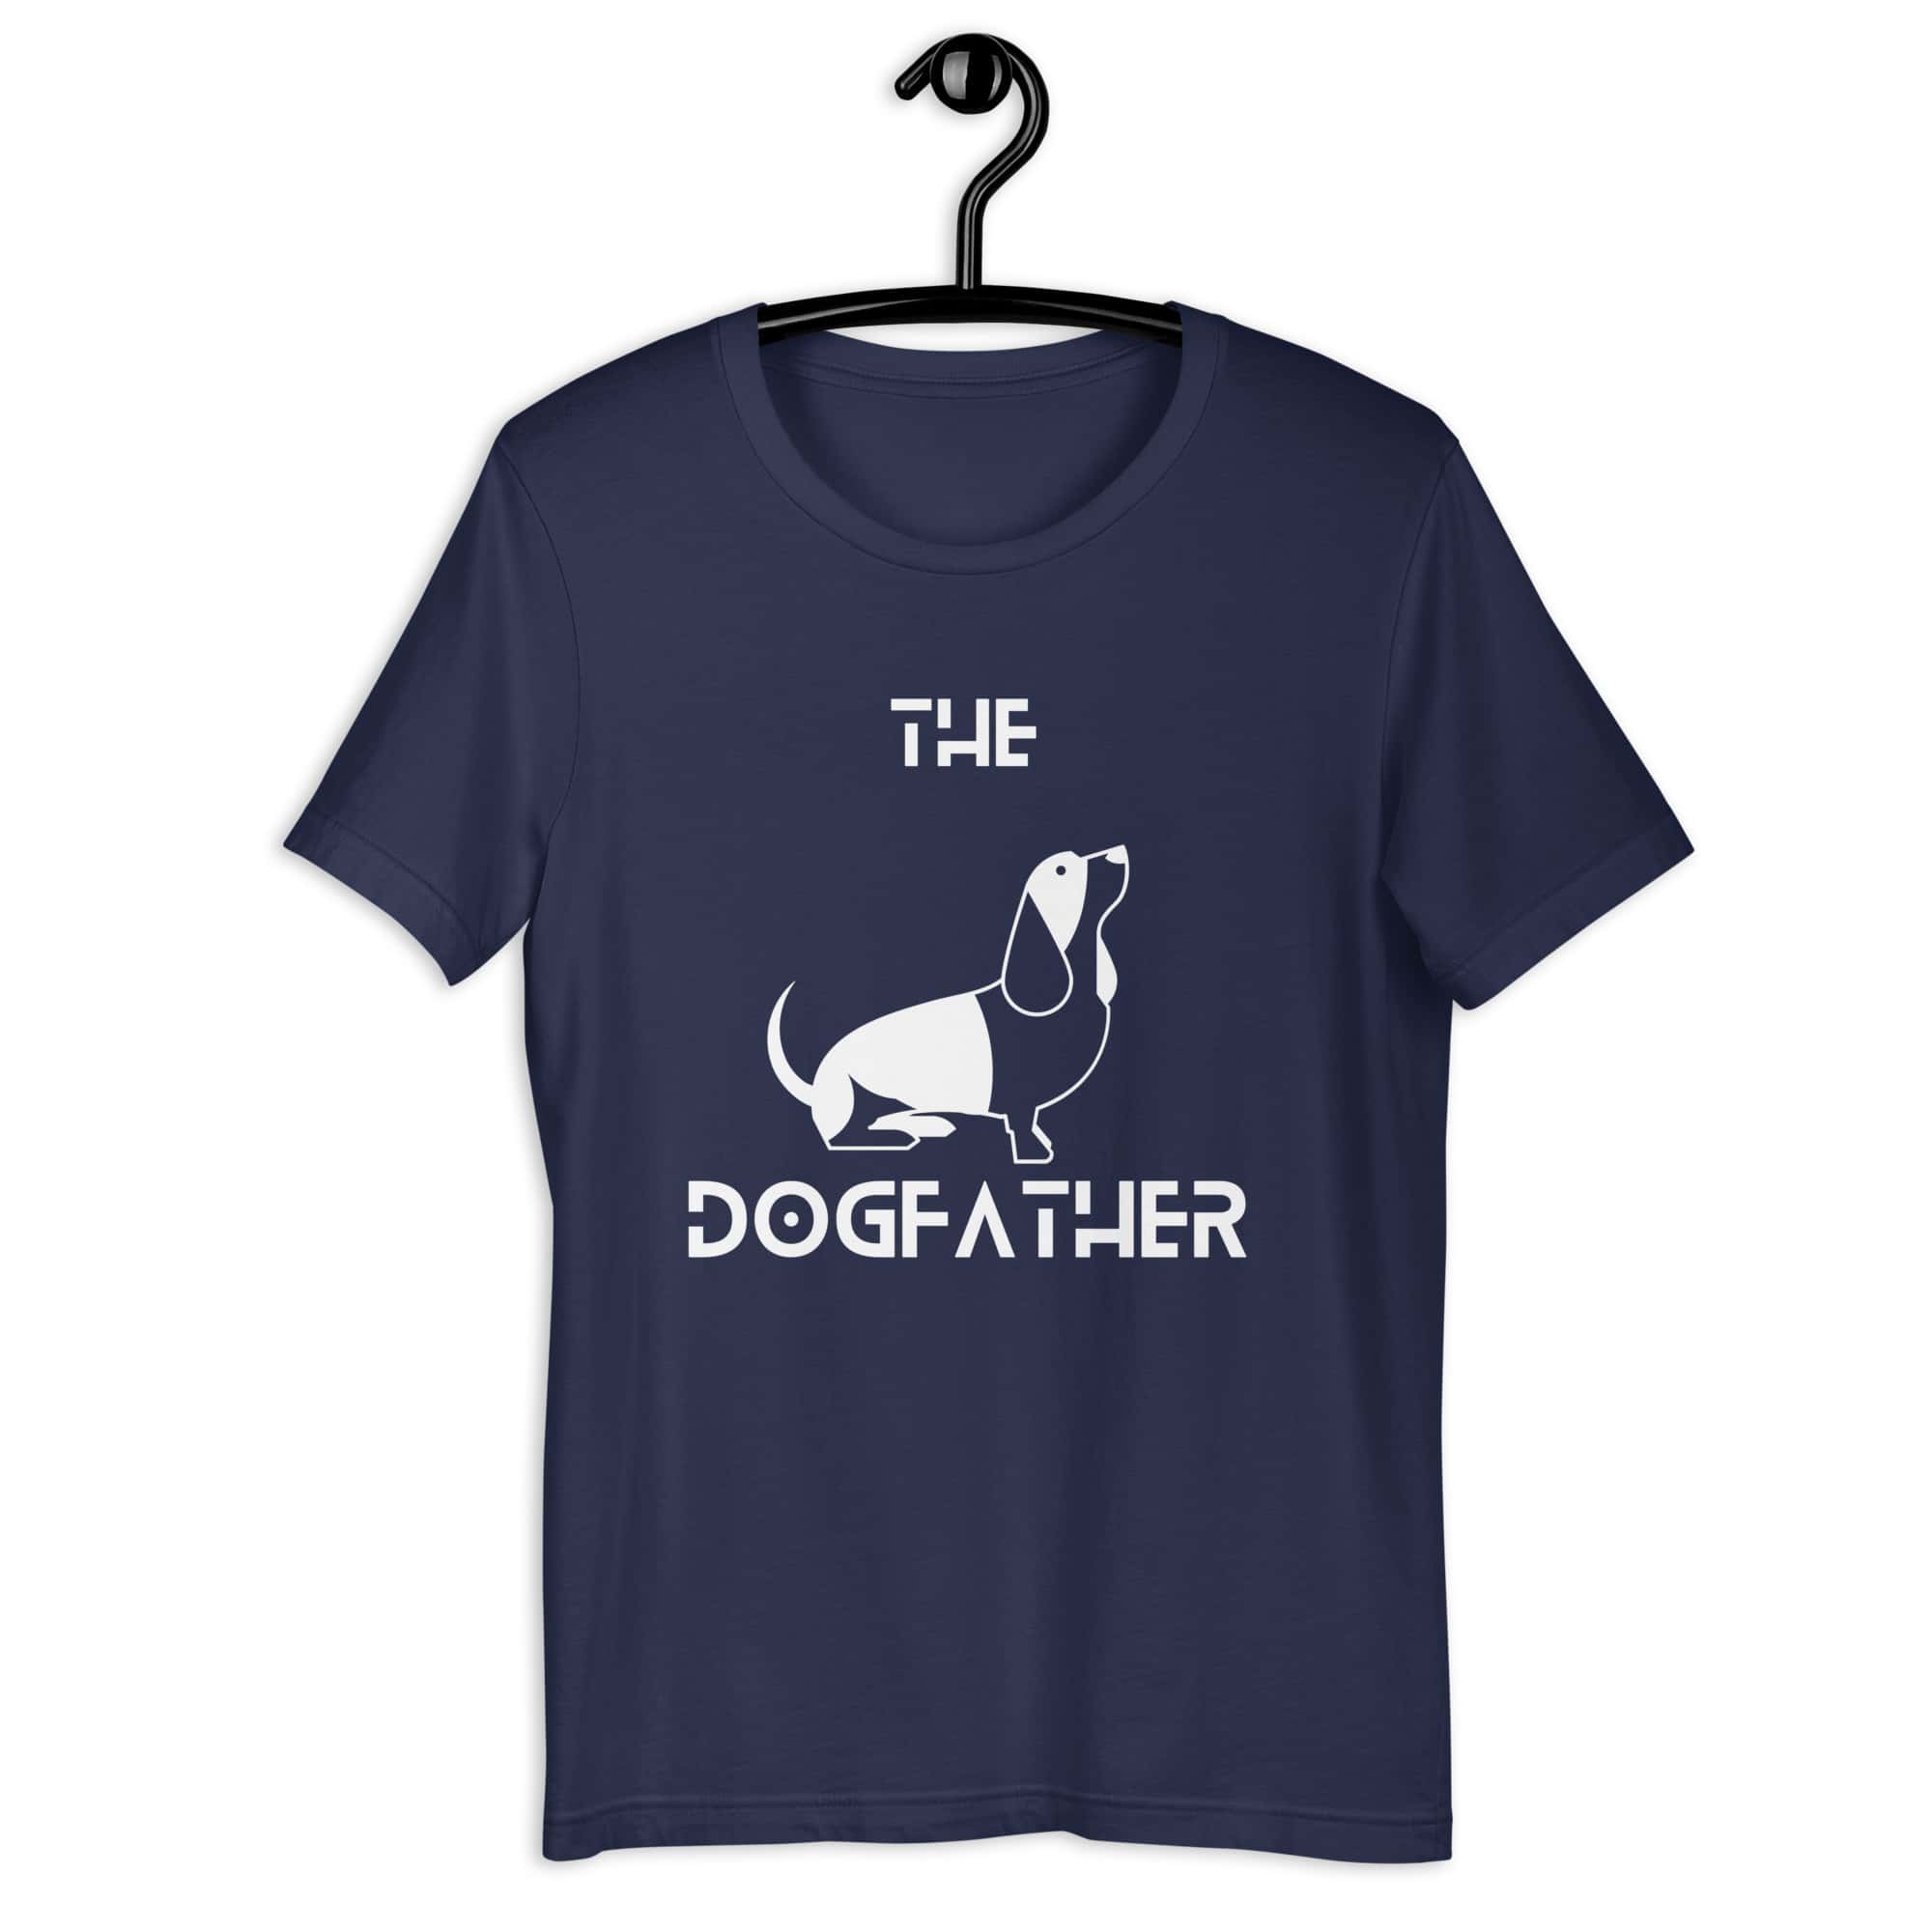 The Dogfather Hounds Unisex T-Shirt. Navy